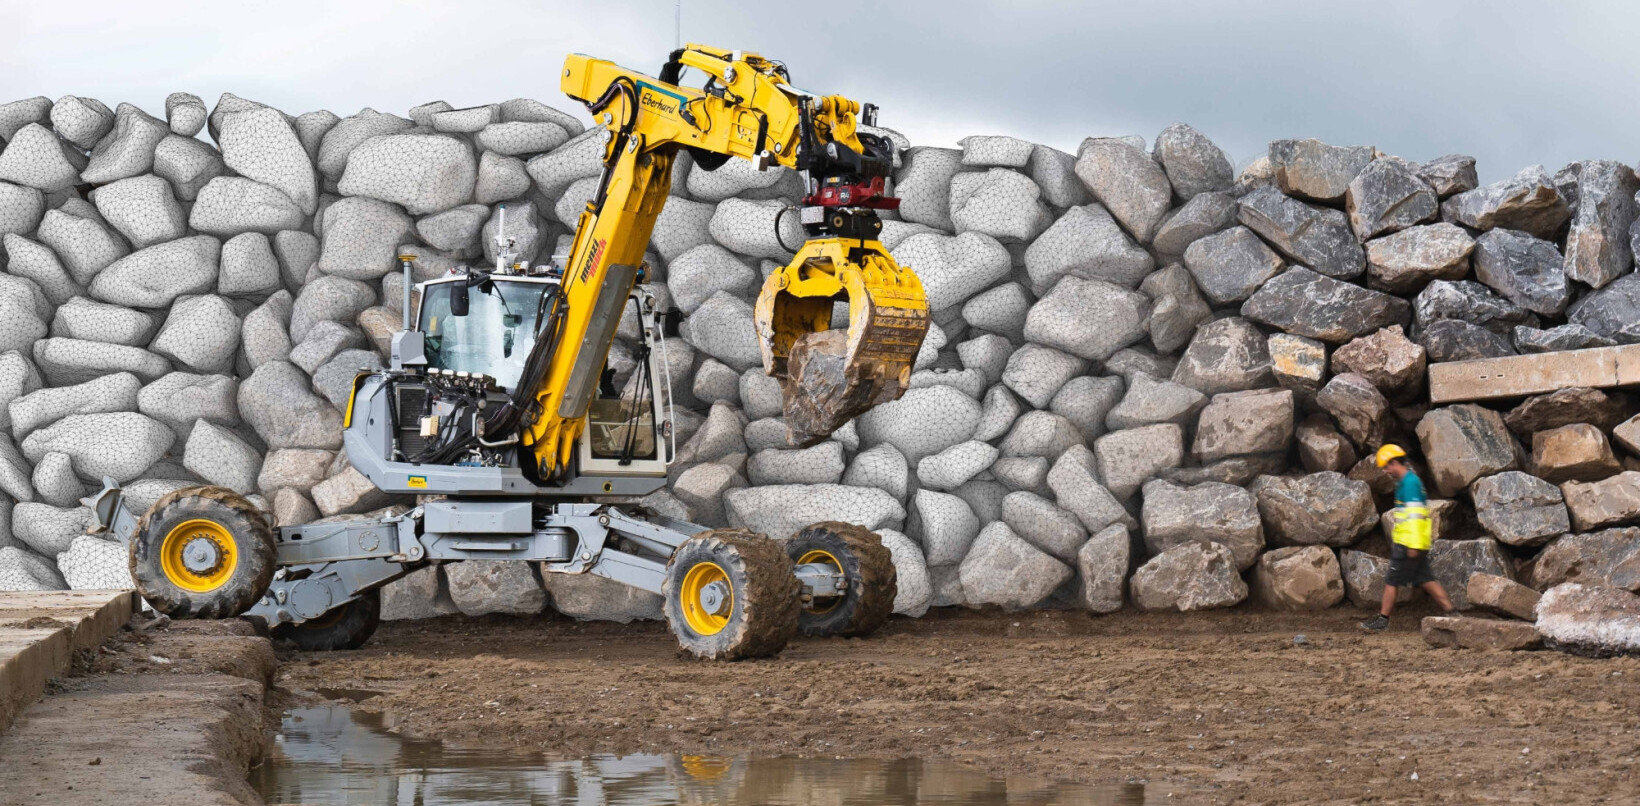 This robotic digger could construct the buildings of the future